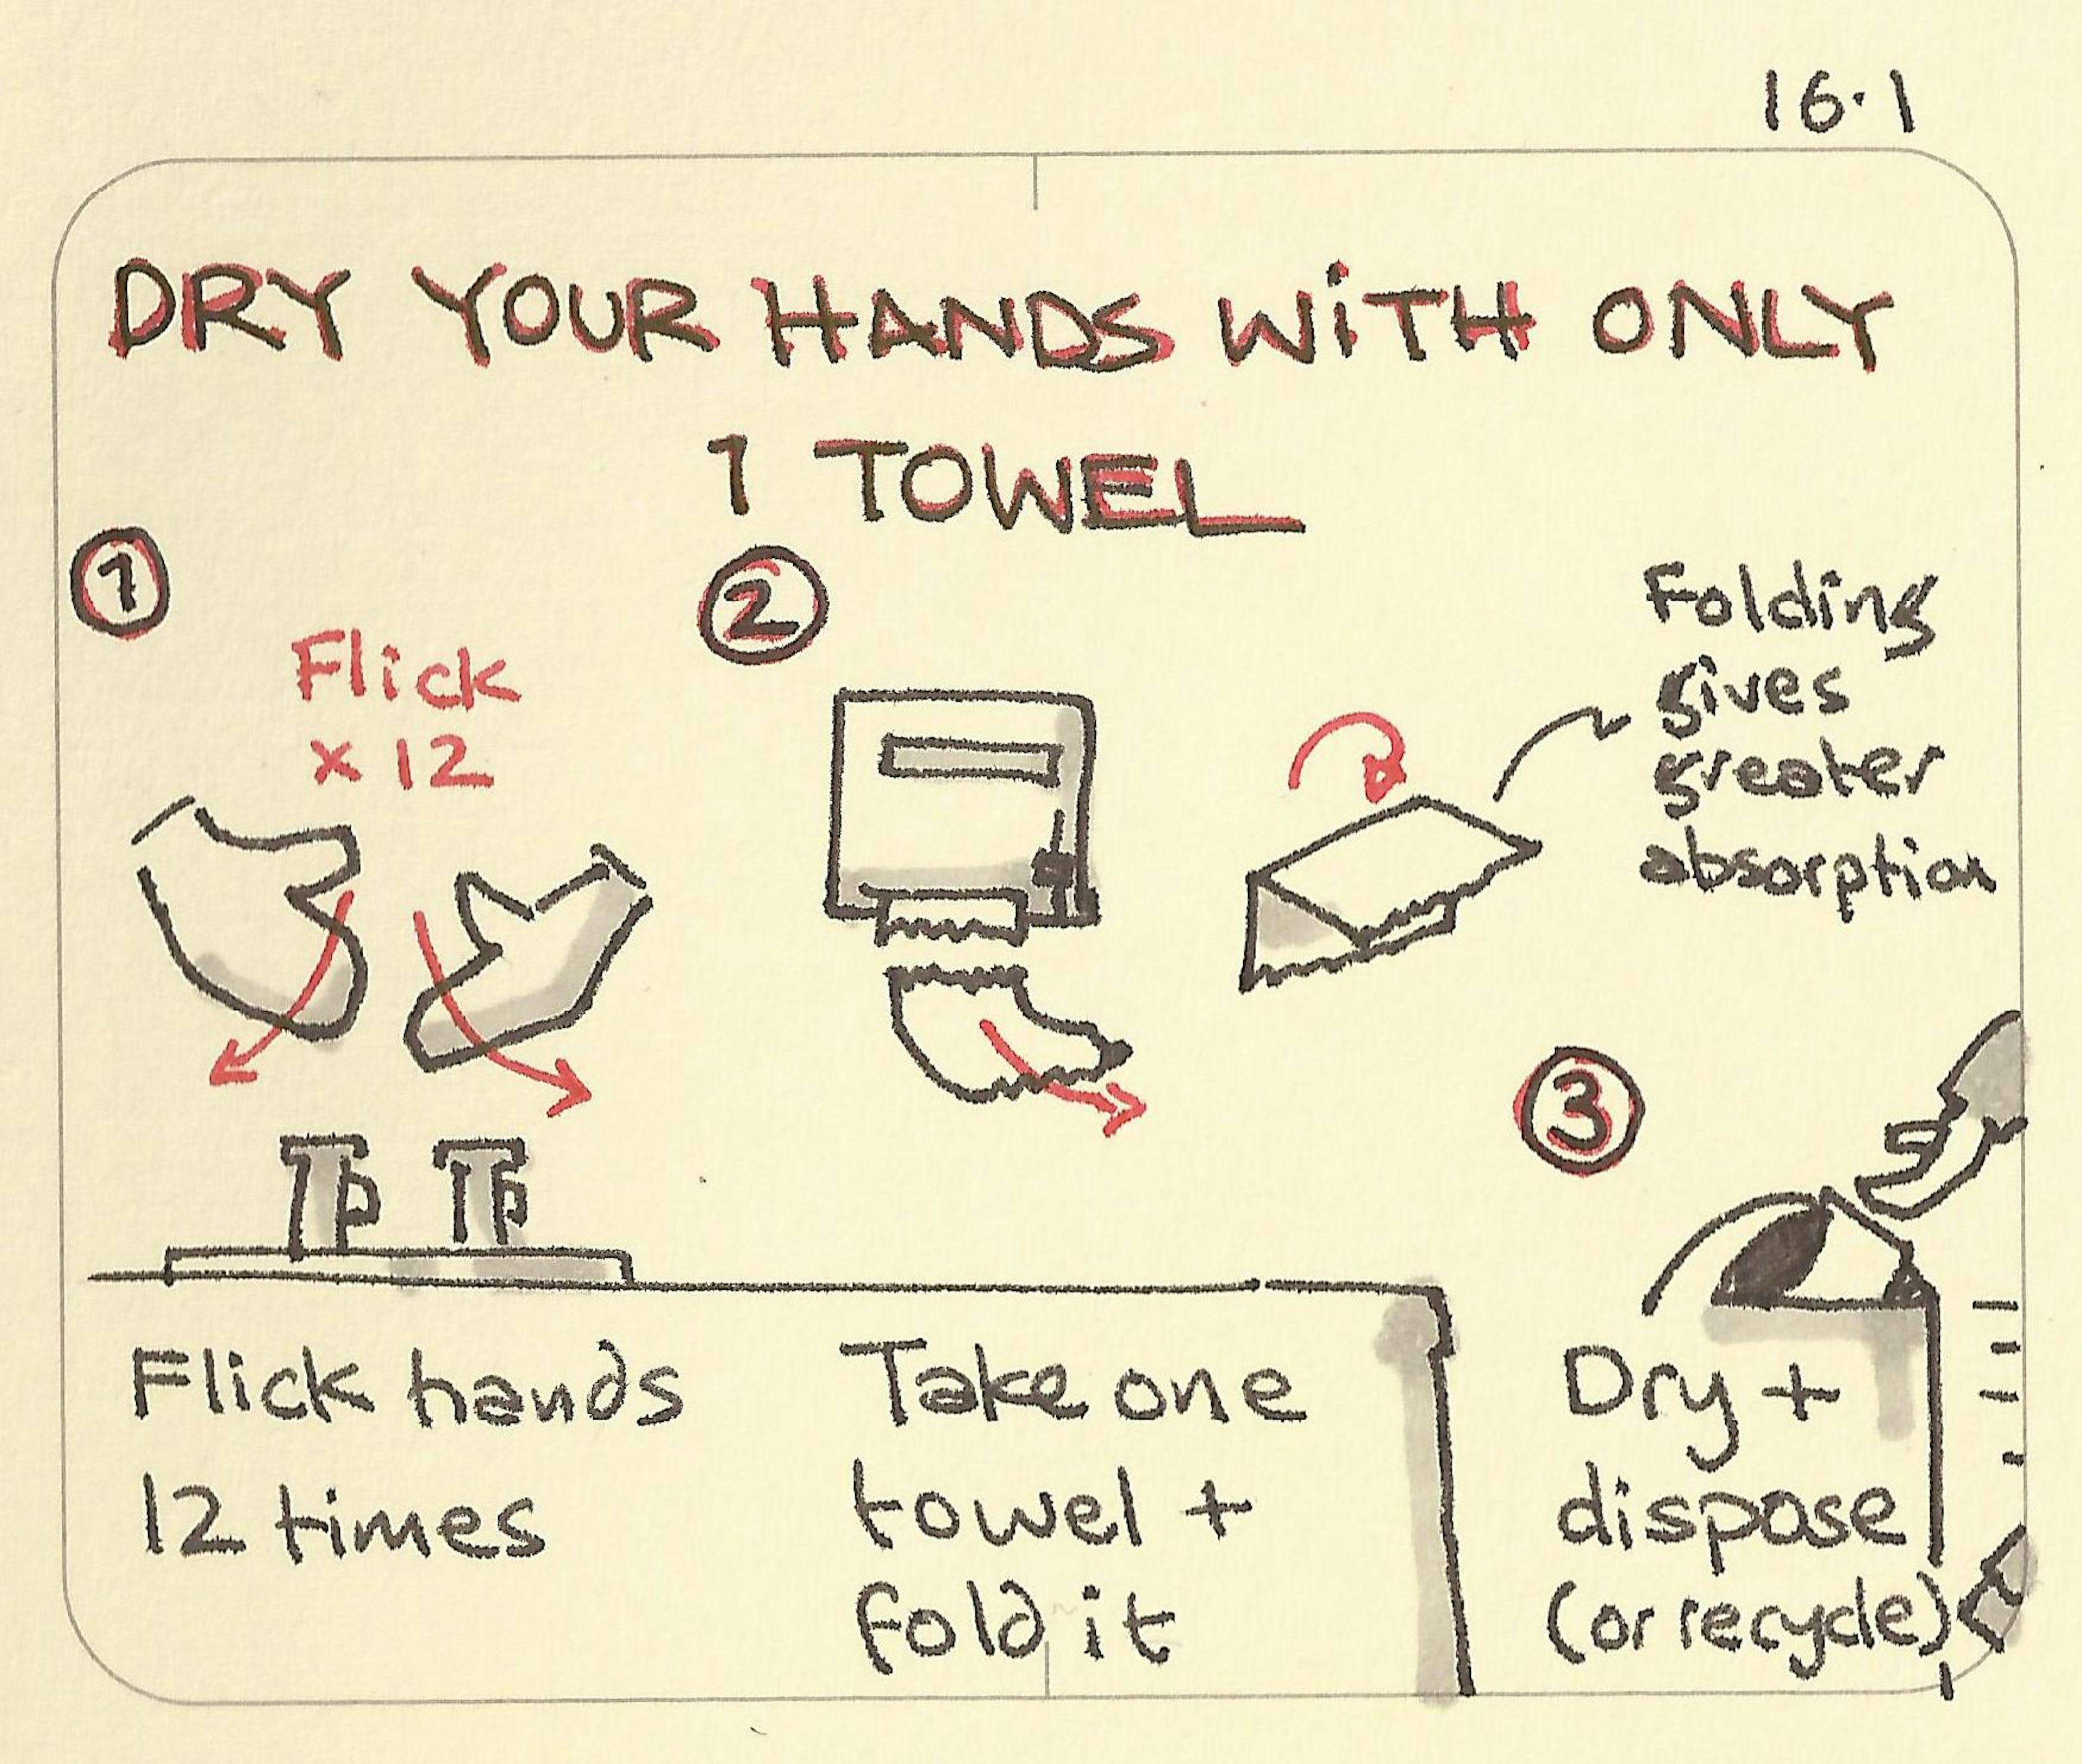 Dry your hands with only one towel - Sketchplanations